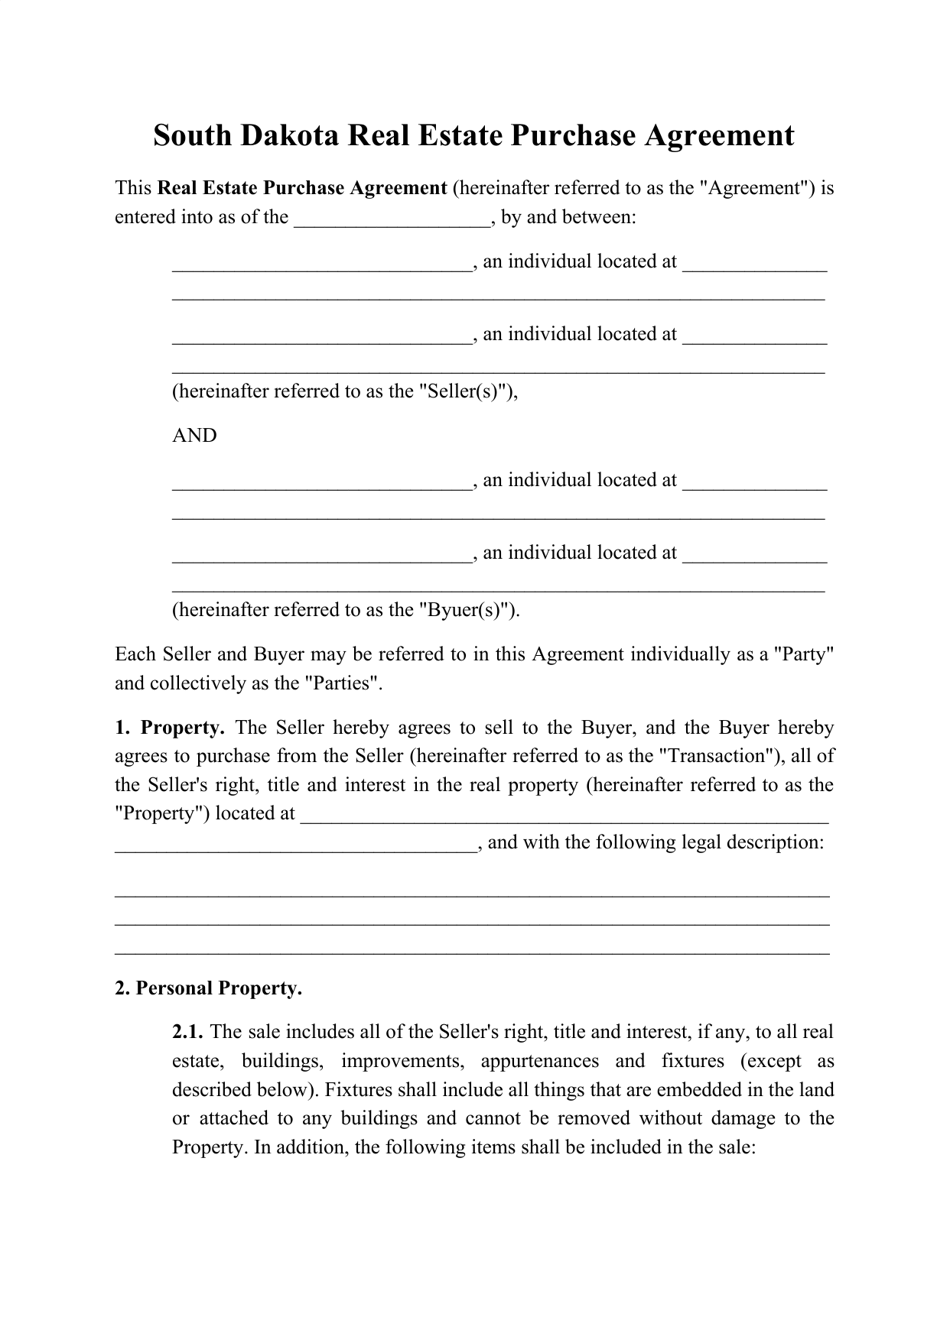 Real Estate Purchase Agreement Template - South Dakota, Page 1